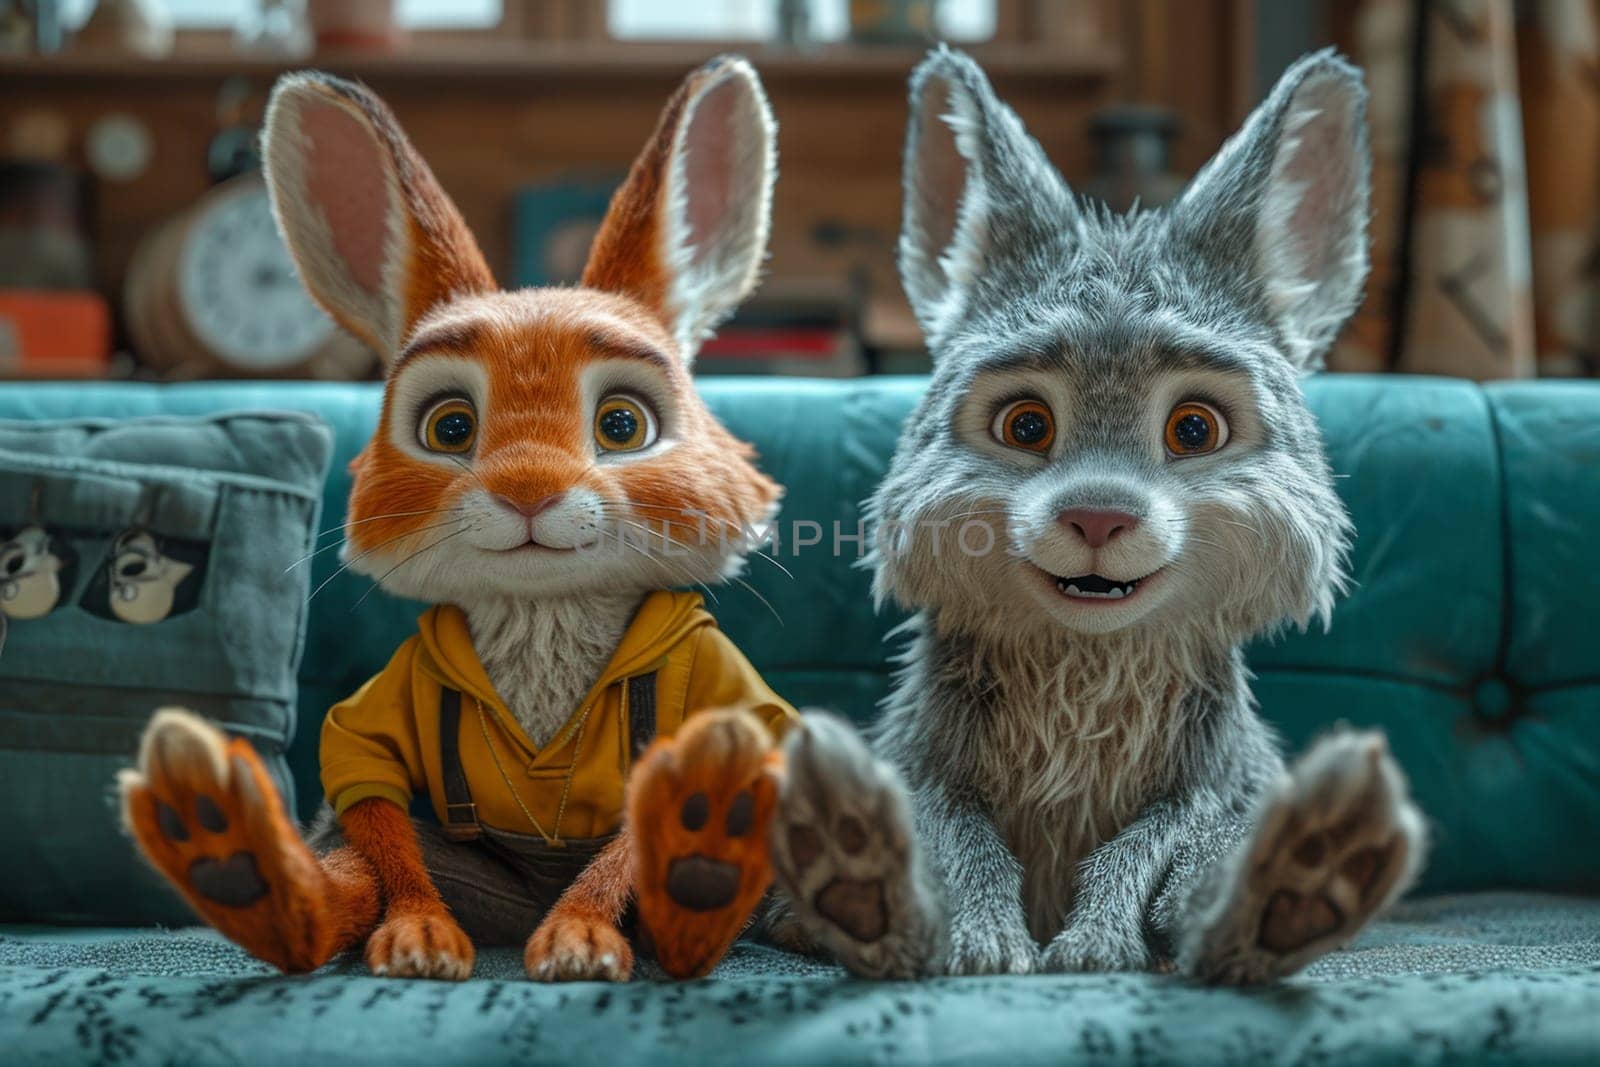 Two cartoon animals are sitting on the couch and looking at the camera. 3d illustration.